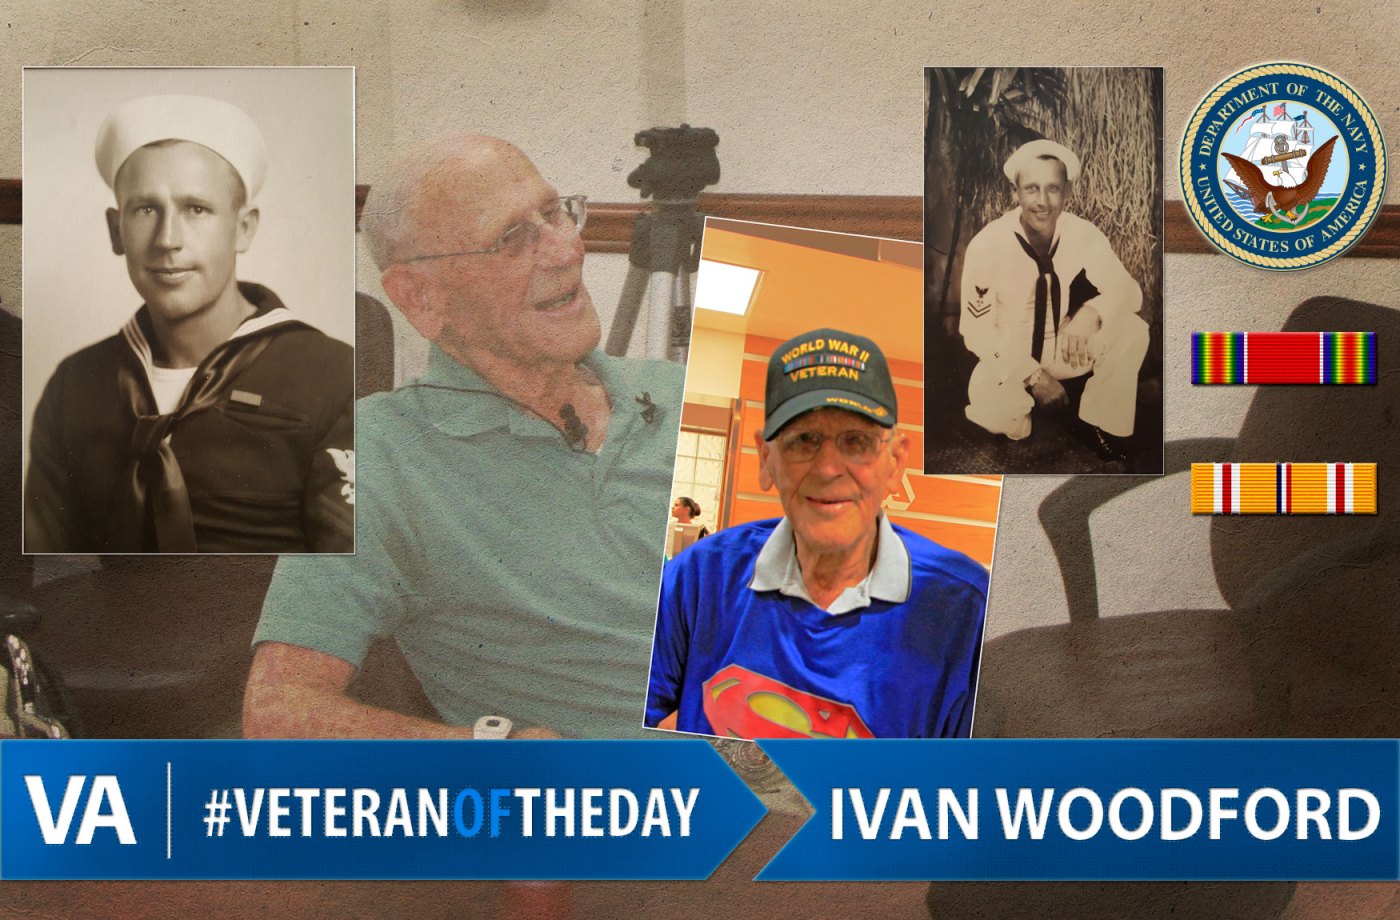 Veteran of the day Ivan Woodford.